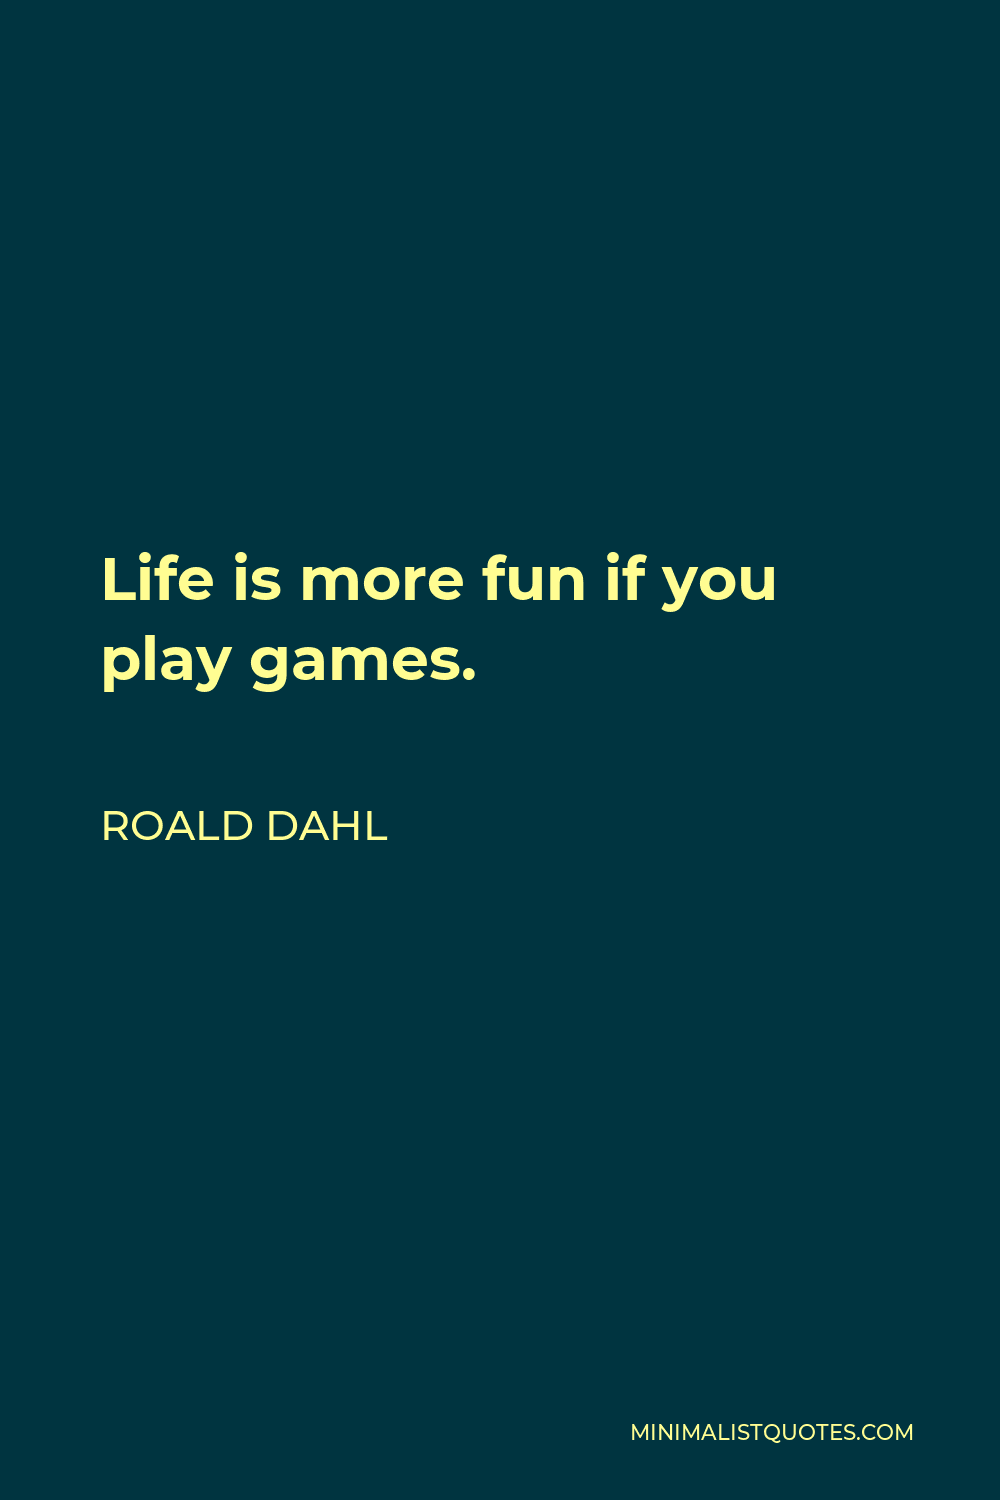 47 If You Play Games famous quotes: Roald Dahl: Life is more fun